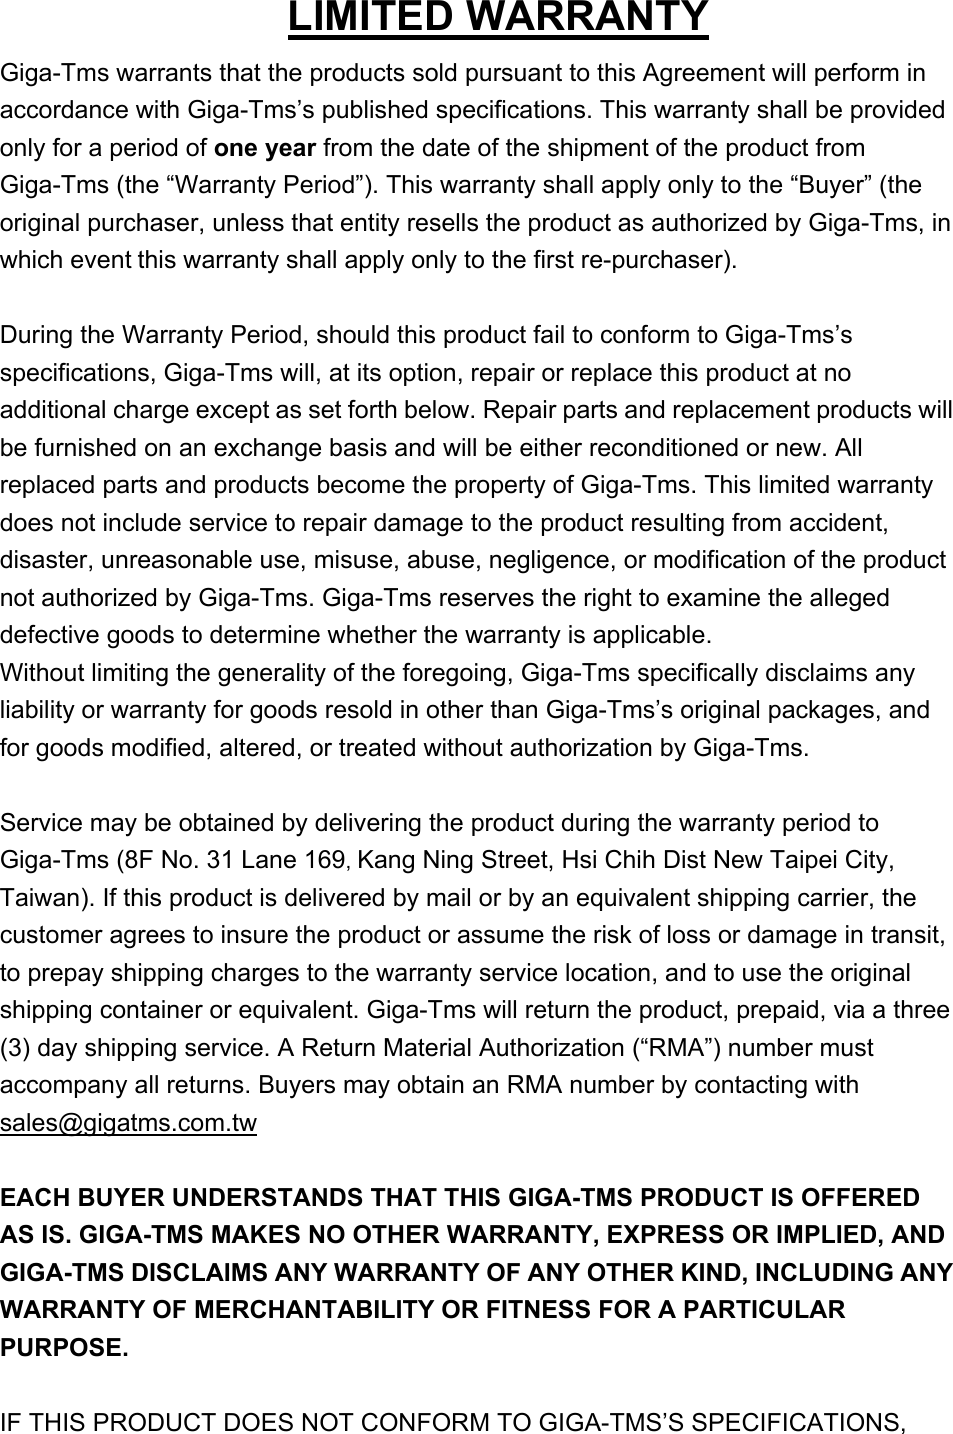 LIMITED WARRANTY Giga-Tms warrants that the products sold pursuant to this Agreement will perform in accordance with Giga-Tms’s published specifications. This warranty shall be provided only for a period of one year from the date of the shipment of the product from Giga-Tms (the “Warranty Period”). This warranty shall apply only to the “Buyer” (the original purchaser, unless that entity resells the product as authorized by Giga-Tms, in which event this warranty shall apply only to the first re-purchaser).  During the Warranty Period, should this product fail to conform to Giga-Tms’s specifications, Giga-Tms will, at its option, repair or replace this product at no additional charge except as set forth below. Repair parts and replacement products will be furnished on an exchange basis and will be either reconditioned or new. All replaced parts and products become the property of Giga-Tms. This limited warranty does not include service to repair damage to the product resulting from accident, disaster, unreasonable use, misuse, abuse, negligence, or modification of the product not authorized by Giga-Tms. Giga-Tms reserves the right to examine the alleged defective goods to determine whether the warranty is applicable.   Without limiting the generality of the foregoing, Giga-Tms specifically disclaims any liability or warranty for goods resold in other than Giga-Tms’s original packages, and for goods modified, altered, or treated without authorization by Giga-Tms.  Service may be obtained by delivering the product during the warranty period to Giga-Tms (8F No. 31 Lane 169, Kang Ning Street, Hsi Chih Dist New Taipei City, Taiwan). If this product is delivered by mail or by an equivalent shipping carrier, the customer agrees to insure the product or assume the risk of loss or damage in transit, to prepay shipping charges to the warranty service location, and to use the original shipping container or equivalent. Giga-Tms will return the product, prepaid, via a three (3) day shipping service. A Return Material Authorization (“RMA”) number must accompany all returns. Buyers may obtain an RMA number by contacting with sales@gigatms.com.tw  EACH BUYER UNDERSTANDS THAT THIS GIGA-TMS PRODUCT IS OFFERED AS IS. GIGA-TMS MAKES NO OTHER WARRANTY, EXPRESS OR IMPLIED, AND GIGA-TMS DISCLAIMS ANY WARRANTY OF ANY OTHER KIND, INCLUDING ANY WARRANTY OF MERCHANTABILITY OR FITNESS FOR A PARTICULAR PURPOSE.    IF THIS PRODUCT DOES NOT CONFORM TO GIGA-TMS’S SPECIFICATIONS, 